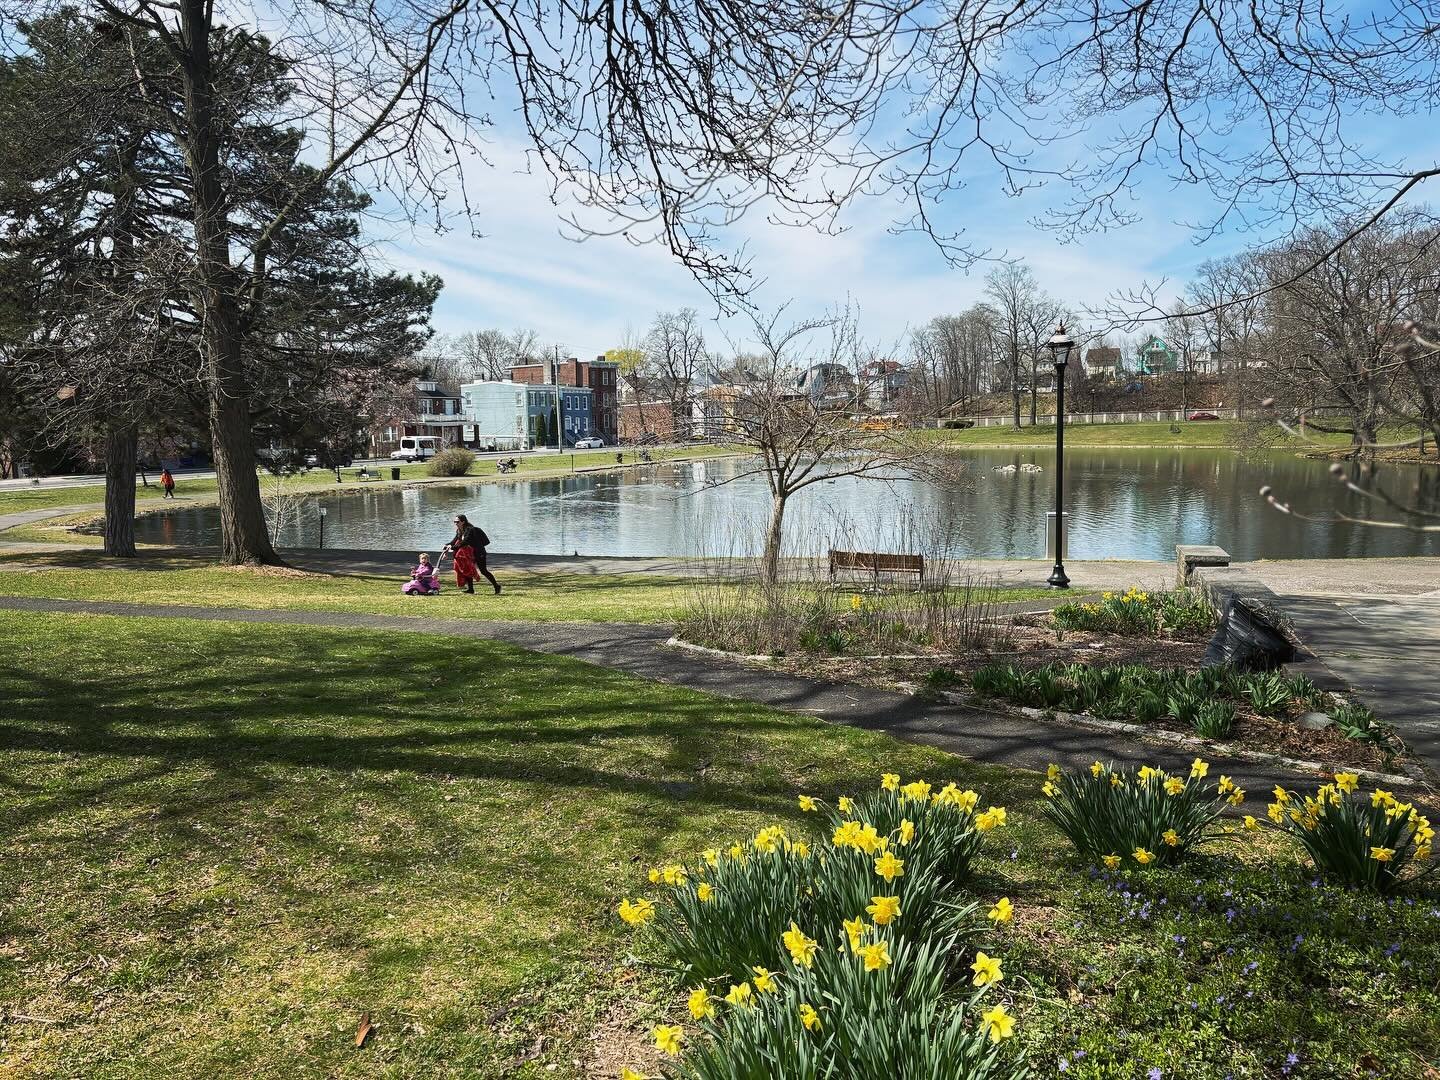 A beautiful spring day in the park. Come out to see the daffodils! 🌼 #downingparknewburgh #olmsted #daffodils #spring #hudsonvalley